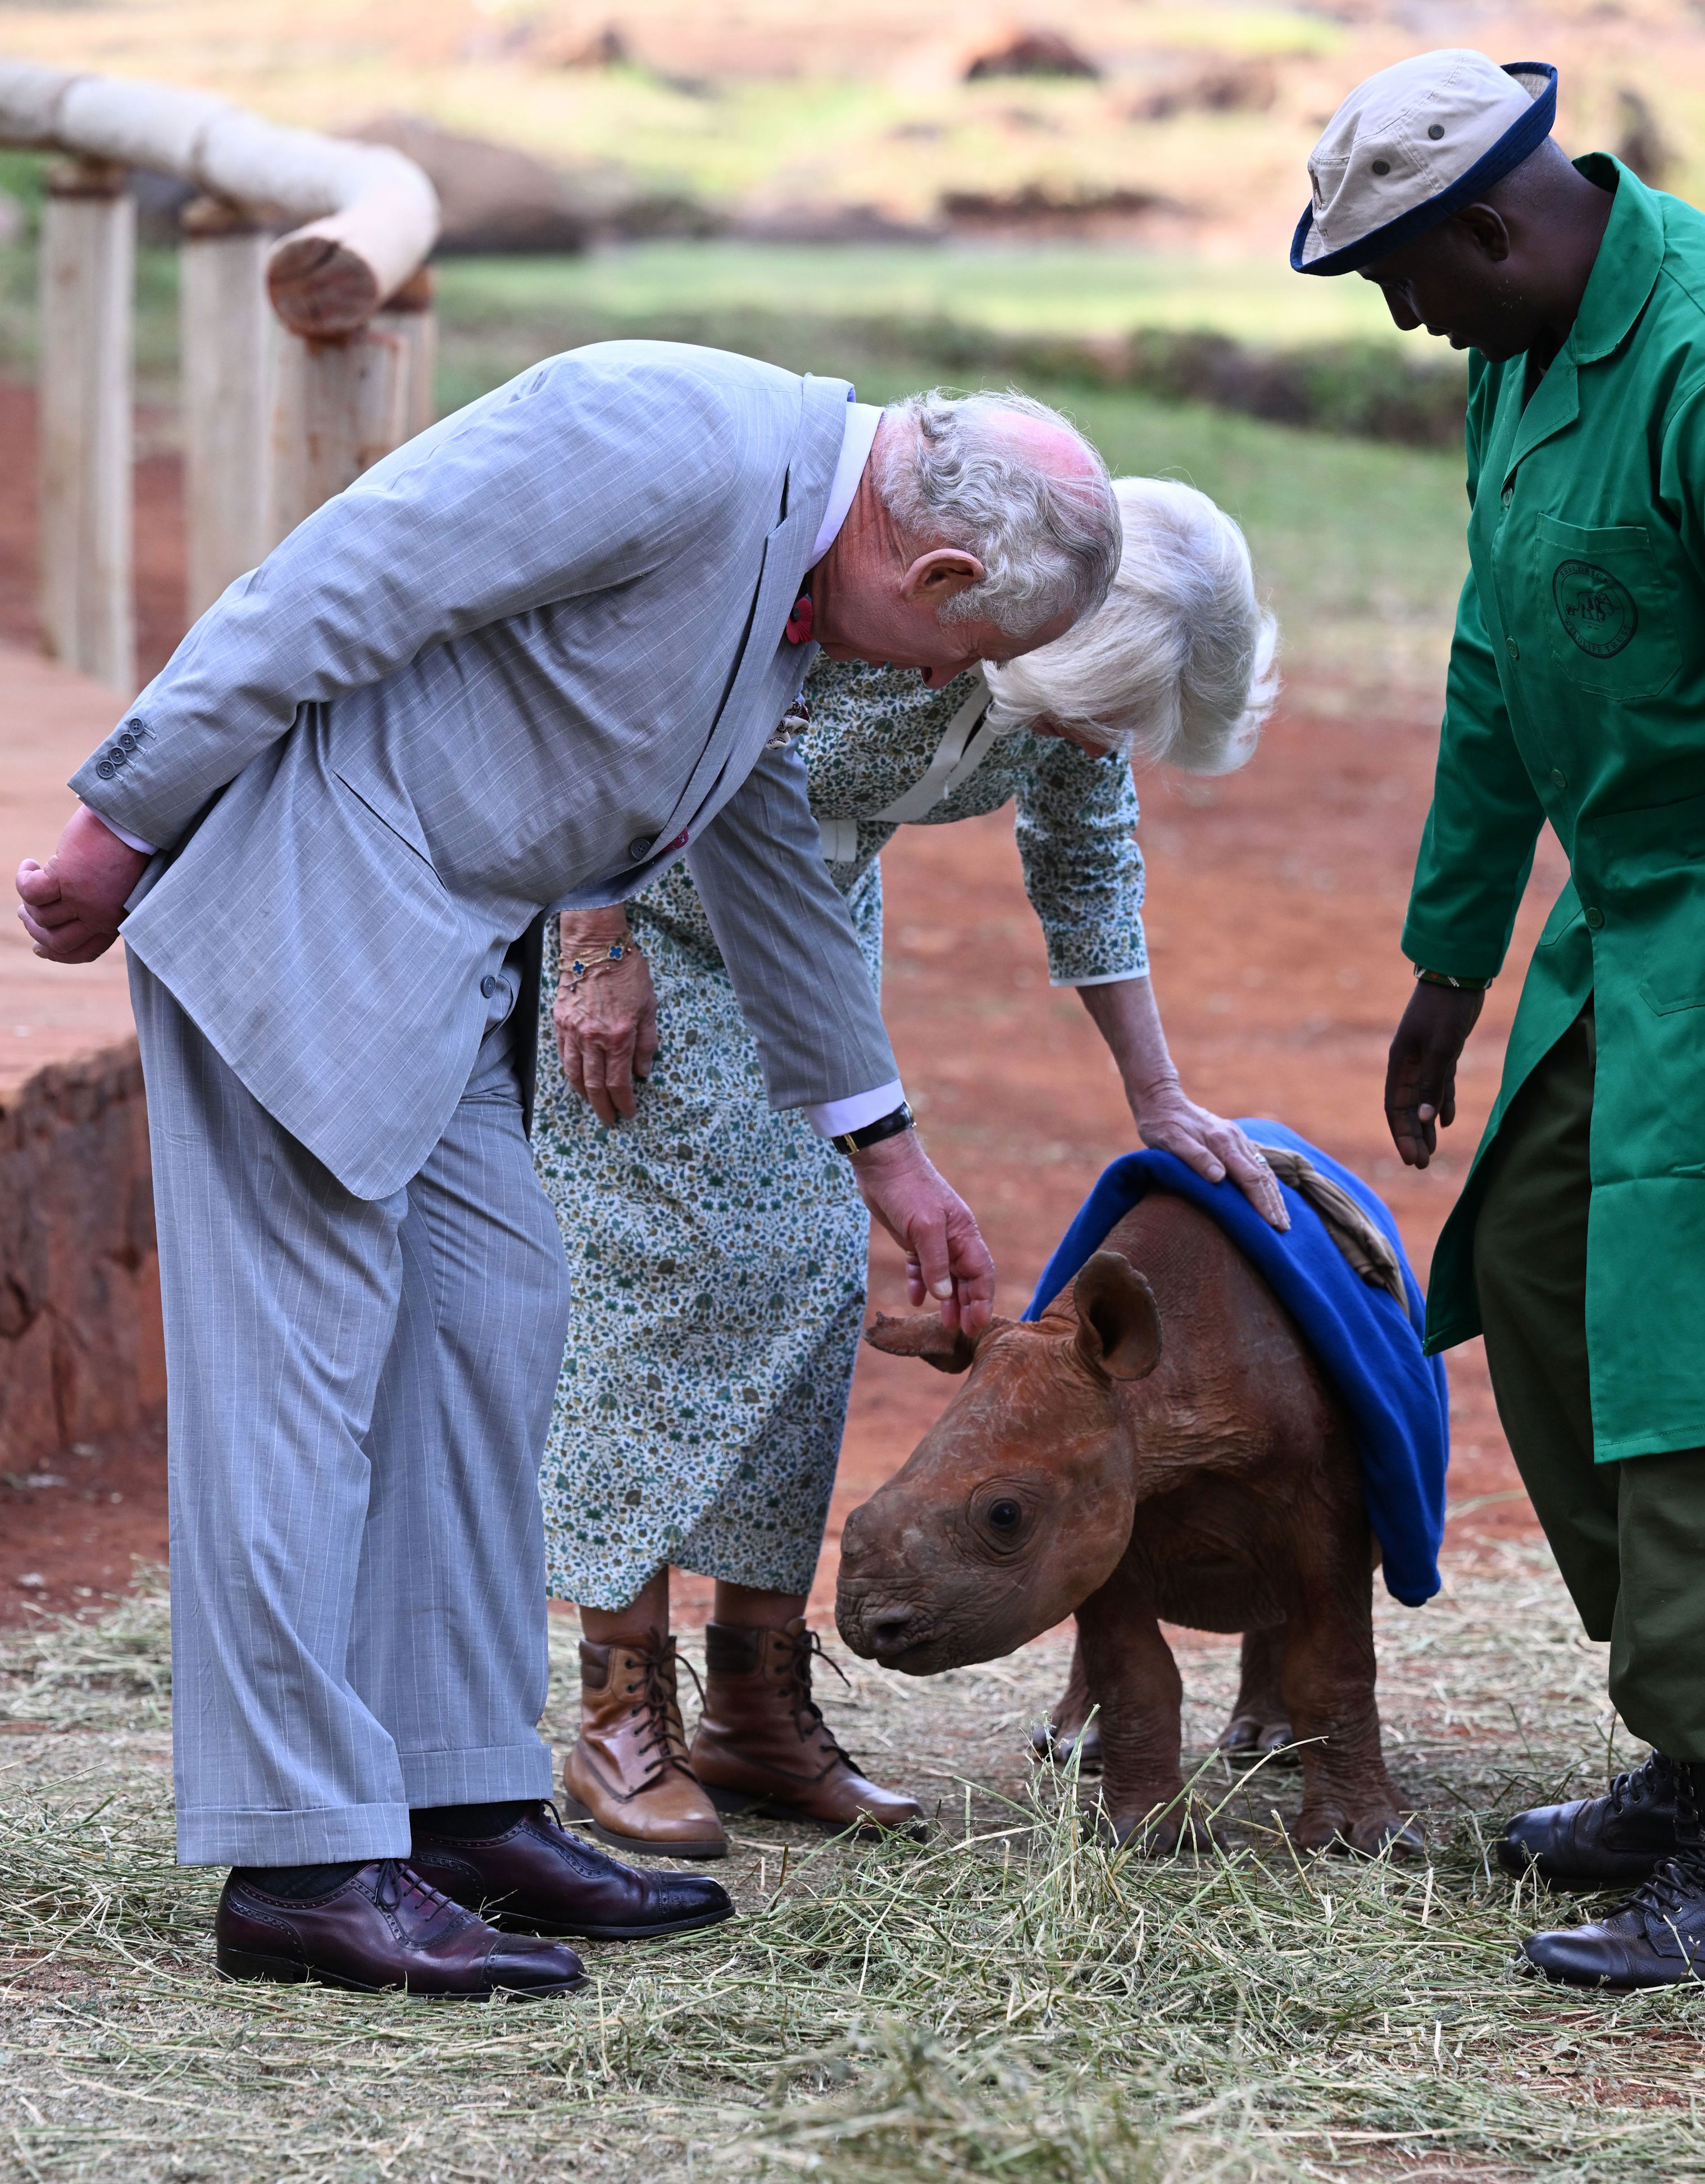 <p><span>King Charles III and Queen Camilla met a baby rhinoceros during a visit to Sheldrick Wildlife Trust Elephant Orphanage in Nairobi National Park in Kenya, where they learned about the trust's work in the conservation and preservation of wildlife and protected areas across the country, on Nov. 1, 2023 -- day two of their </span><a href="https://www.wonderwall.com/entertainment/king-charles-iii-and-queen-camillas-royal-tour-of-kenya-the-best-pictures-of-their-controversial-visit-806094.gallery">state visit to Kenya</a><span>.</span></p>